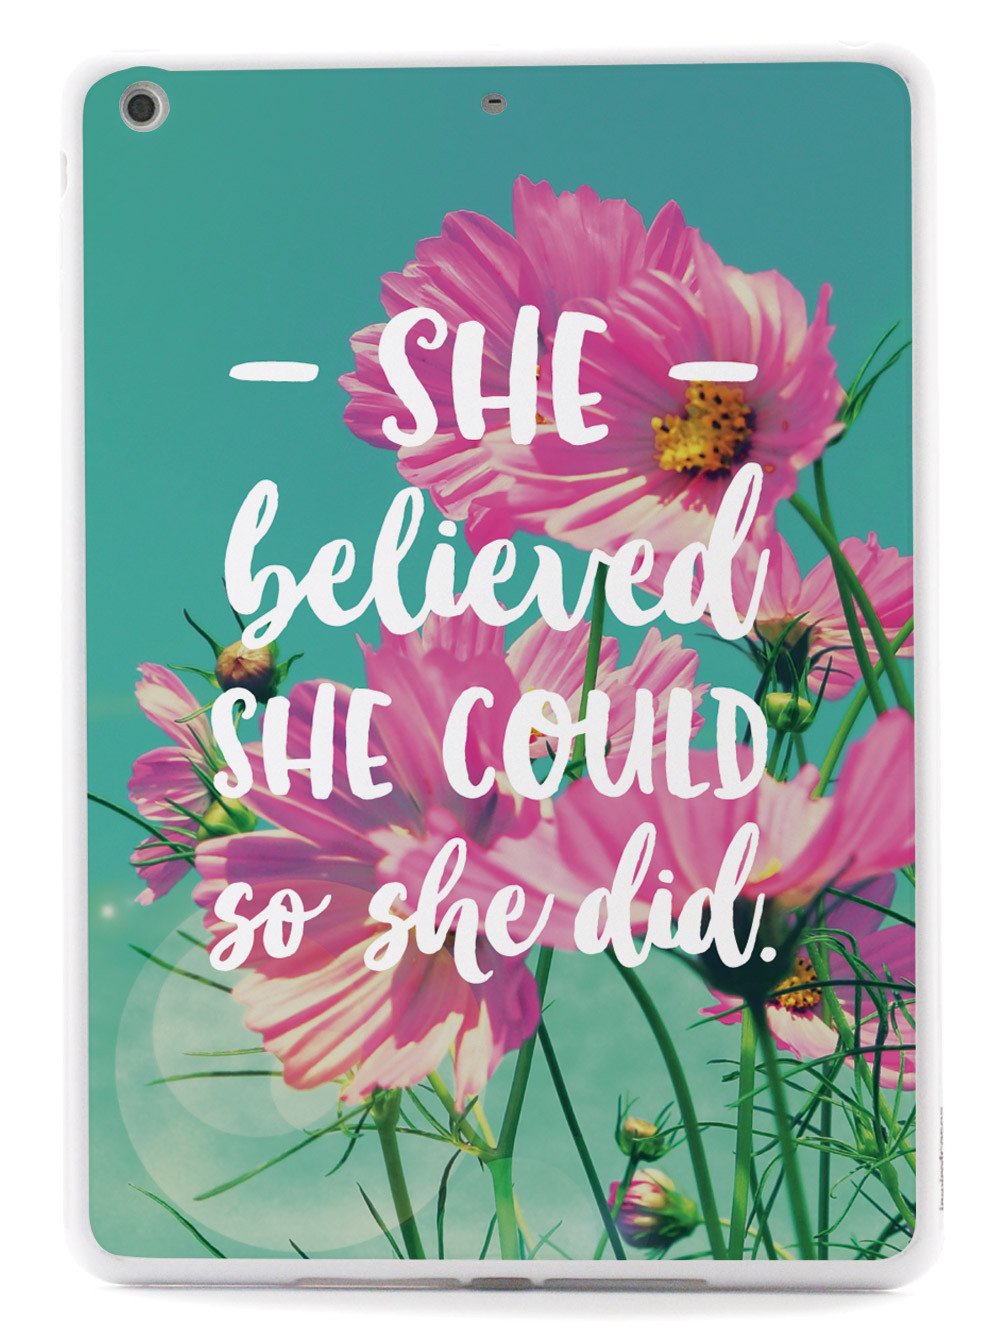 So She Did - Flower background Case - pipercleo.com